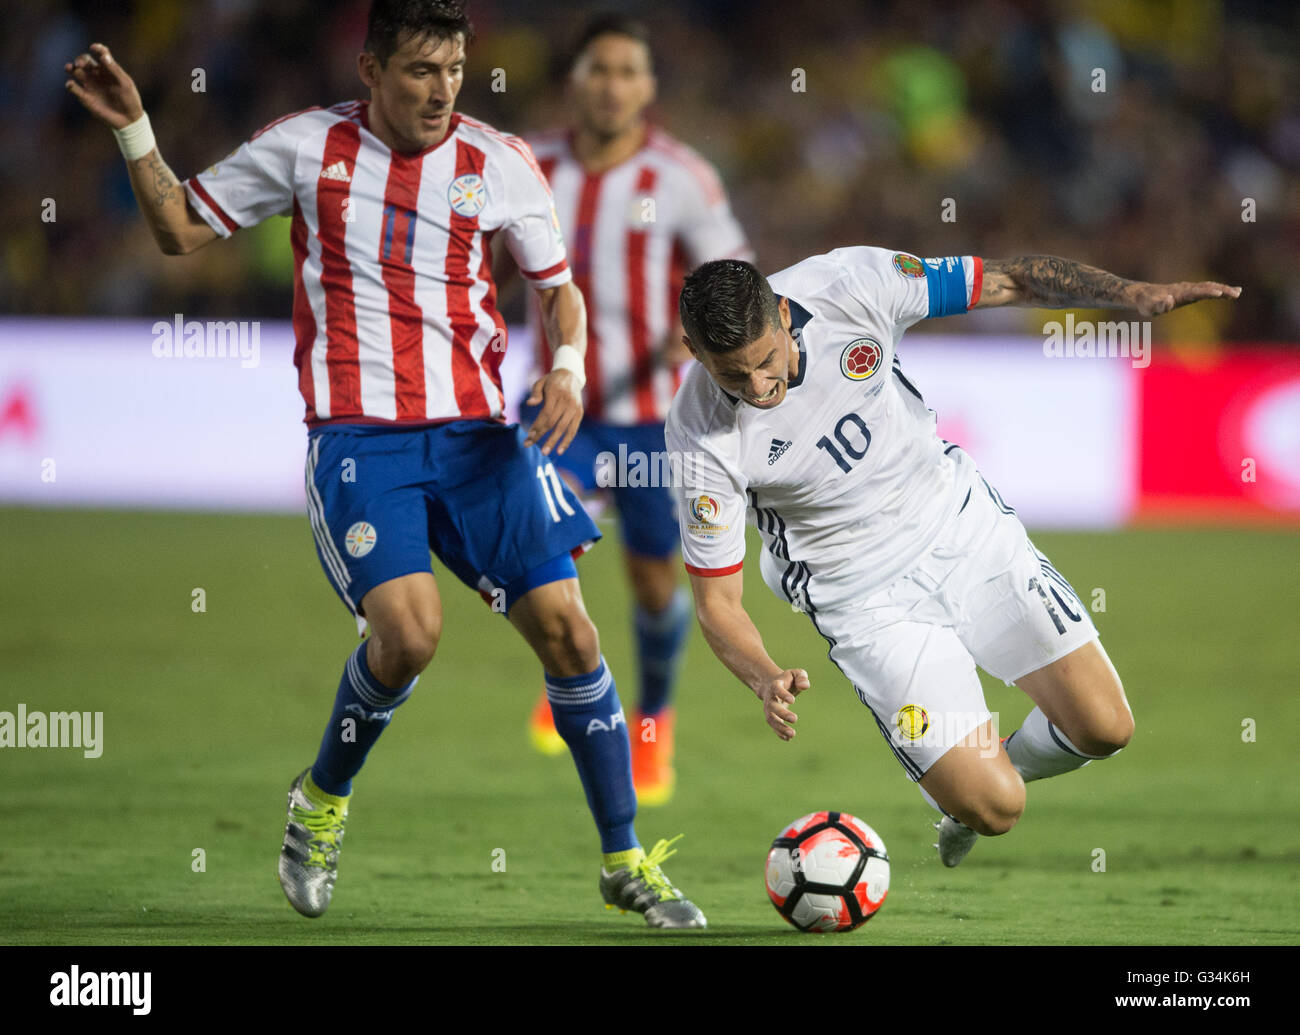 Pasadena, USA. 7th June, 2016. Colombia's James Rodriguez (R) falls during the Copa America Centenario Group A match between Colombia and Paraguay at Rose Bowl Stadium in Pasadena, California, the United States, June 7, 2016. © Yang Lei/Xinhua/Alamy Live News Stock Photo